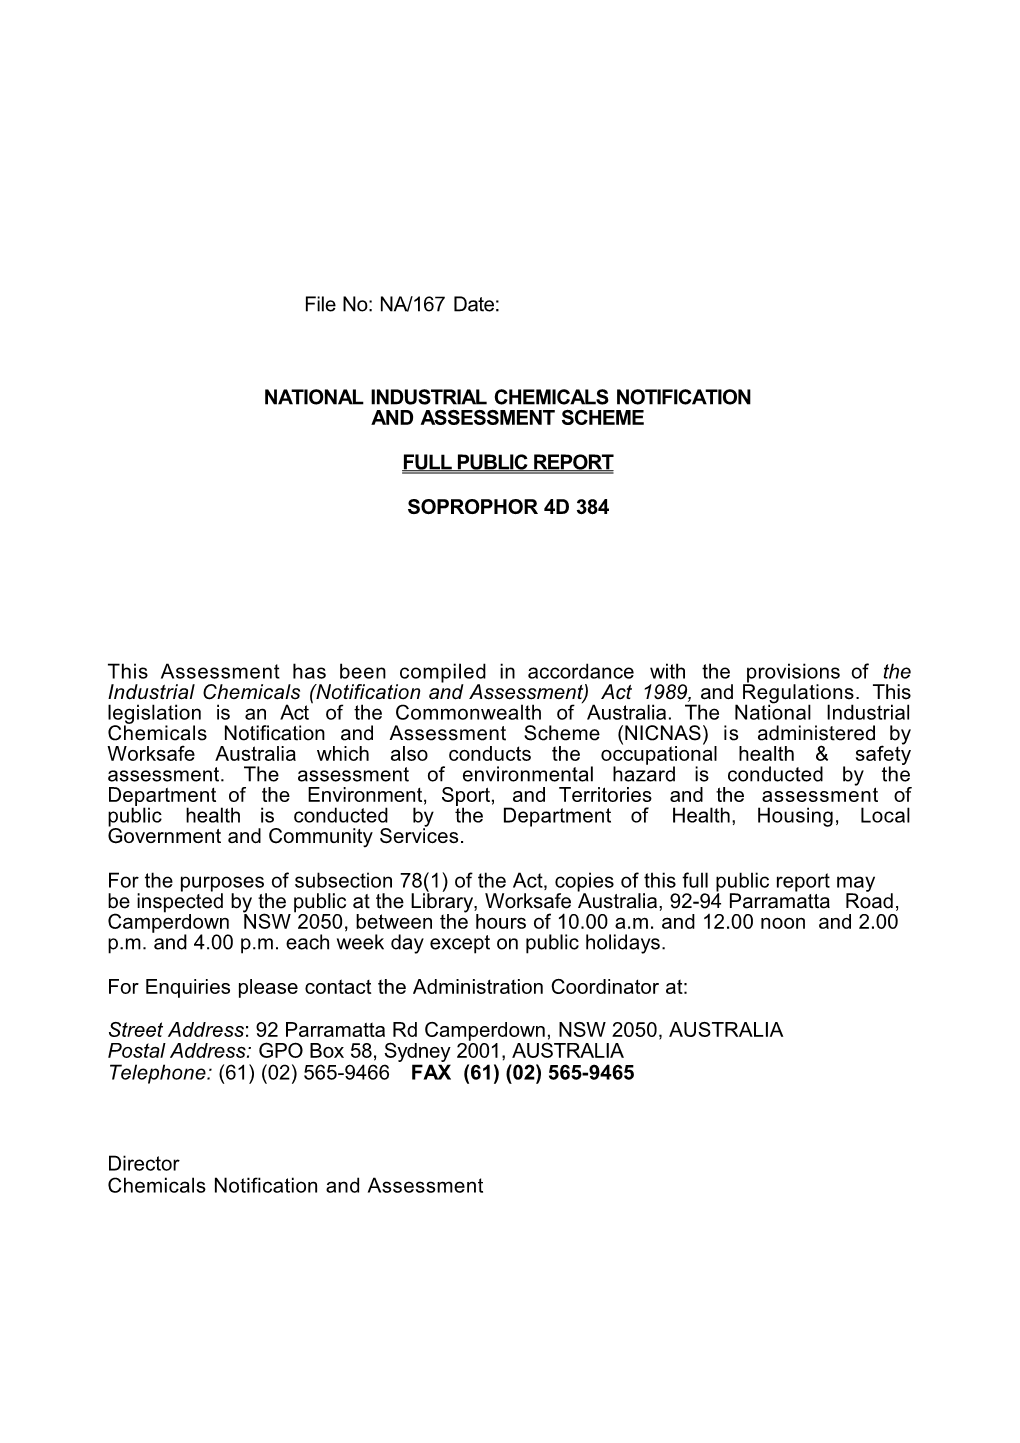 National Industrial Chemicals Notification and Assessment Scheme s34